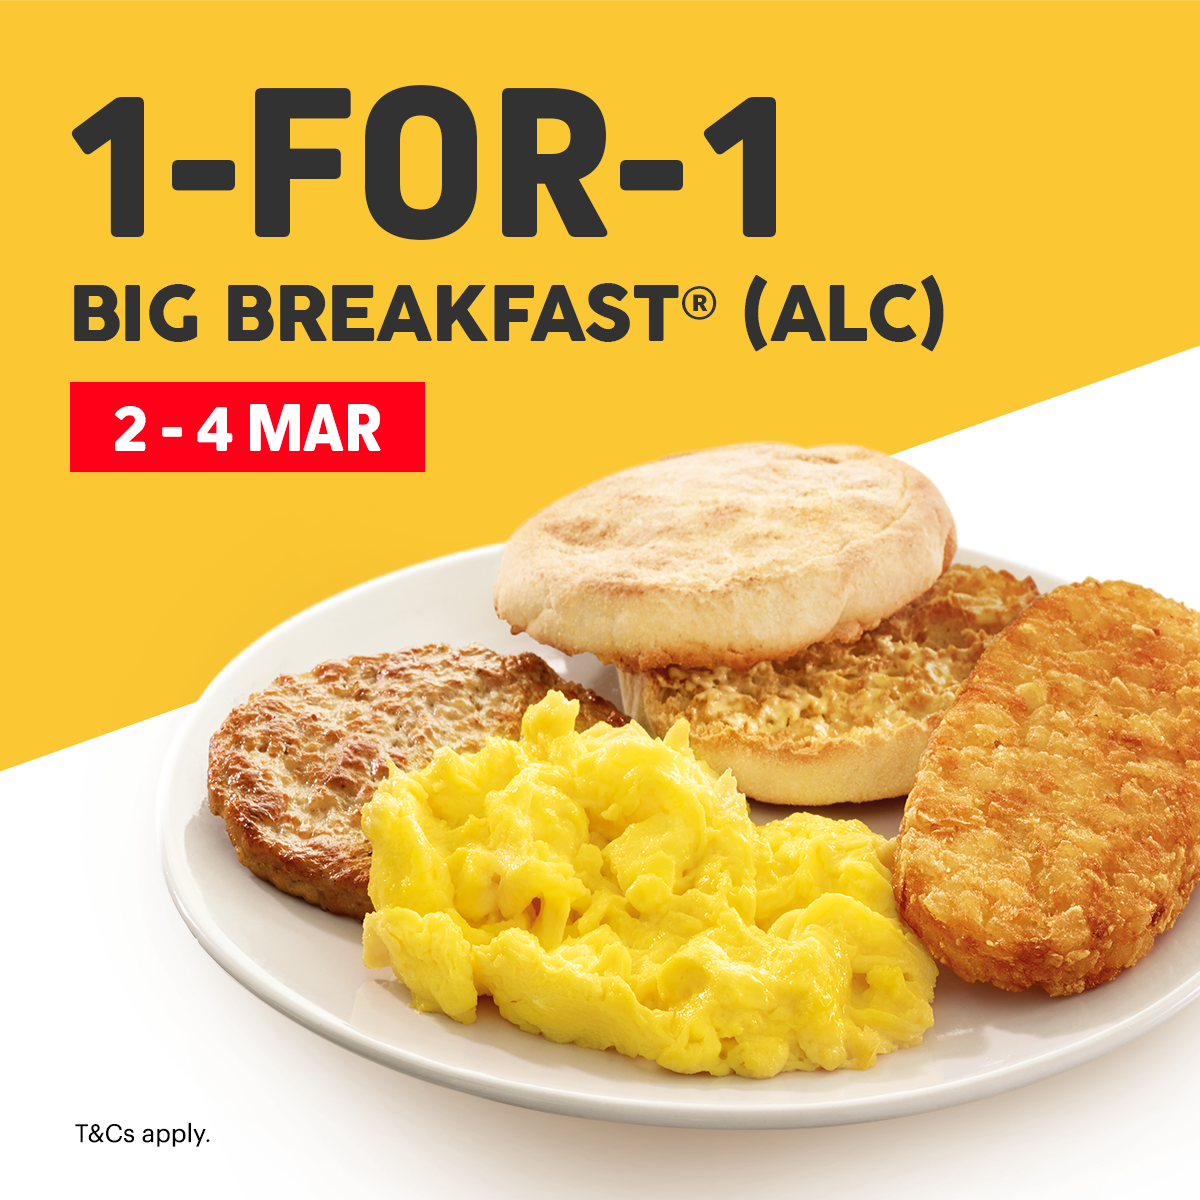 1-FOR-1 Big Breakfast at McDonald’s from 2 – 4 Mar 20 - 1